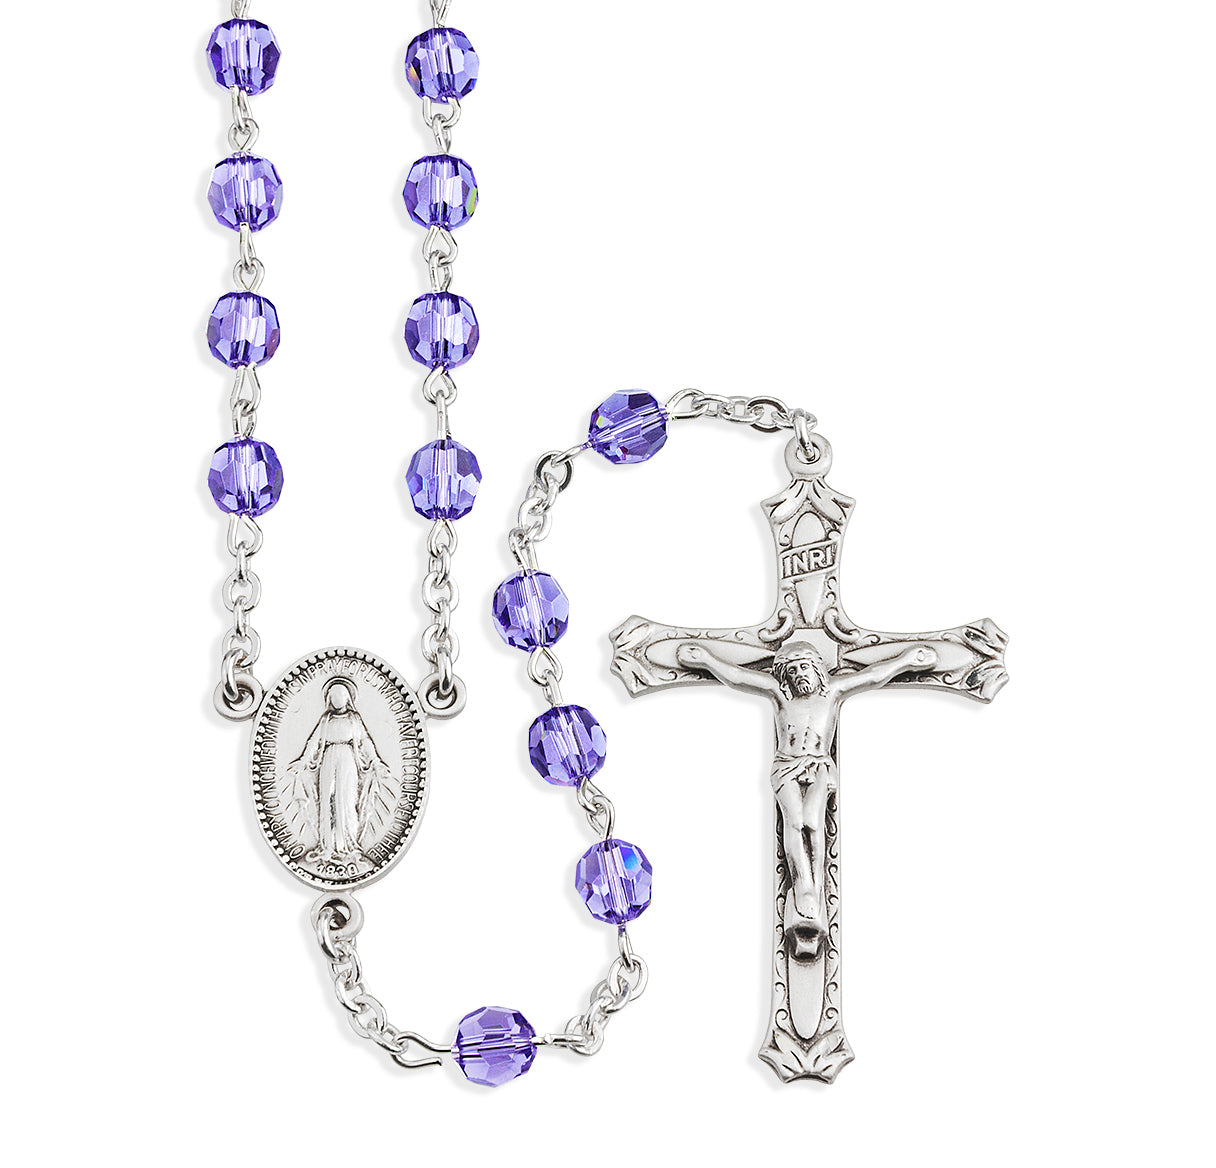 Rosary Sterling Crucifix and Centerpiece Created with Swarovski Crystal 6mm Faceted Round Tanzanite Beads by HMH